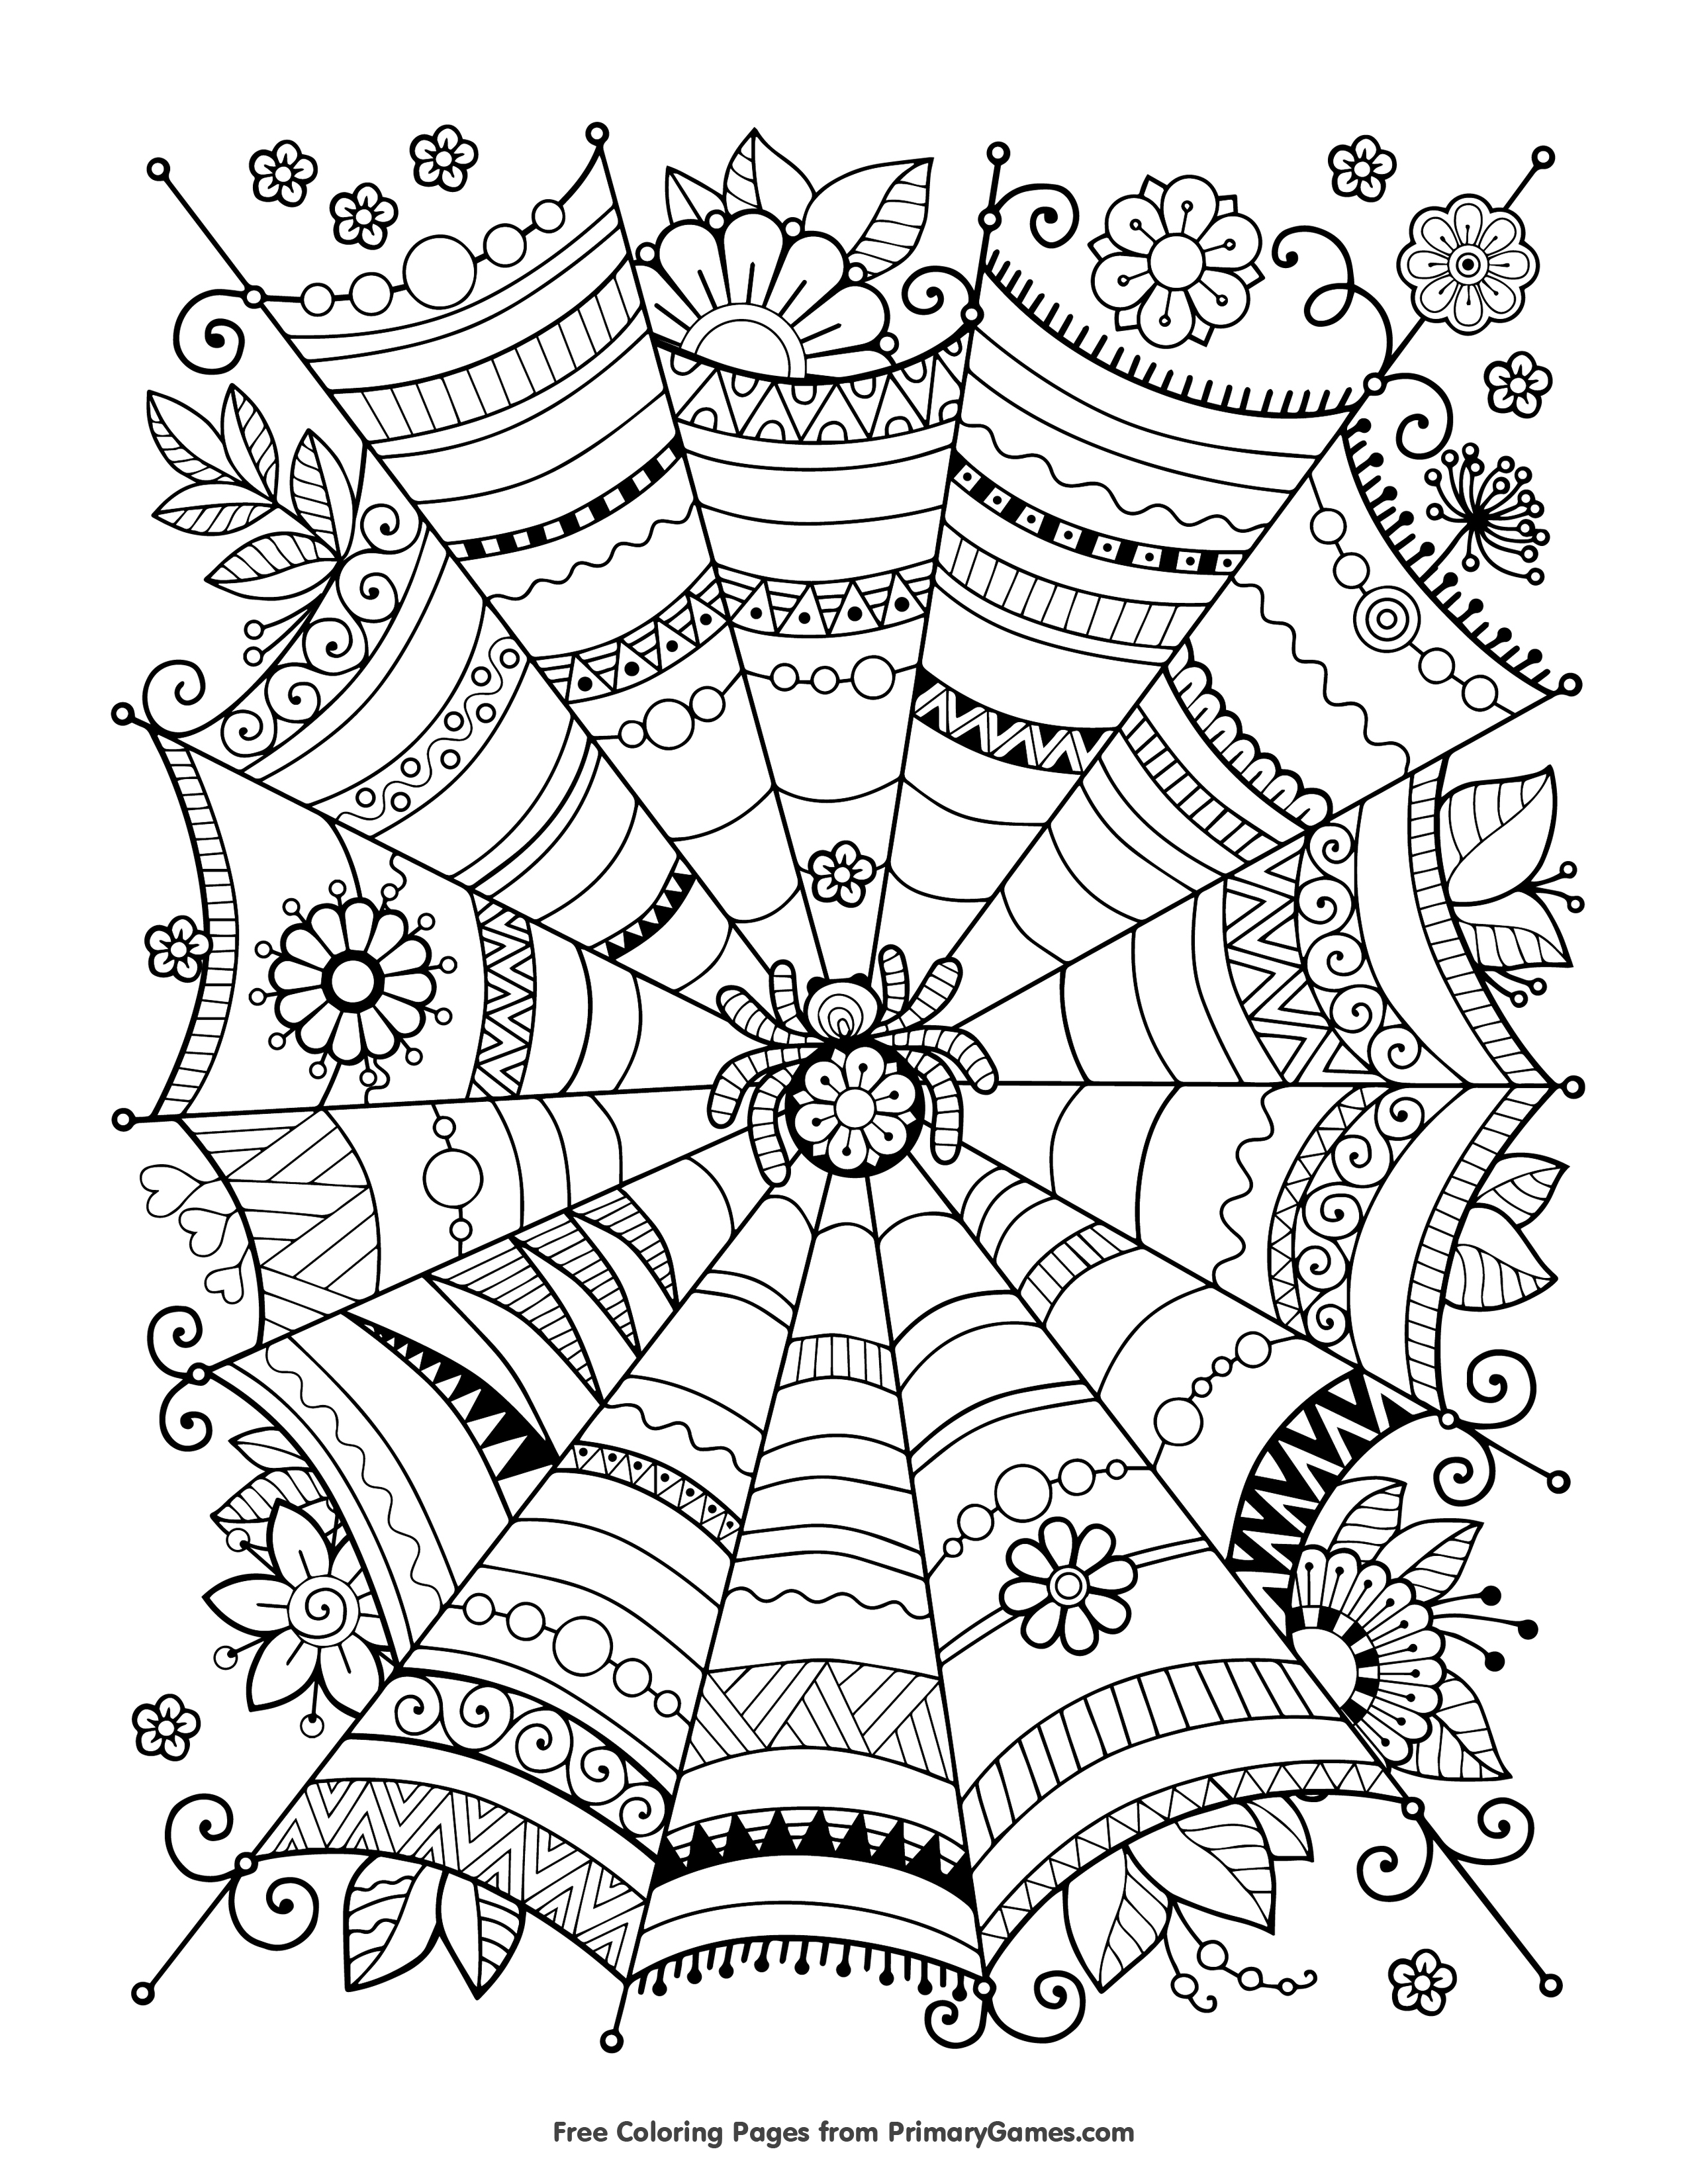 FREE Halloween Coloring Pages for Adults & Kids  